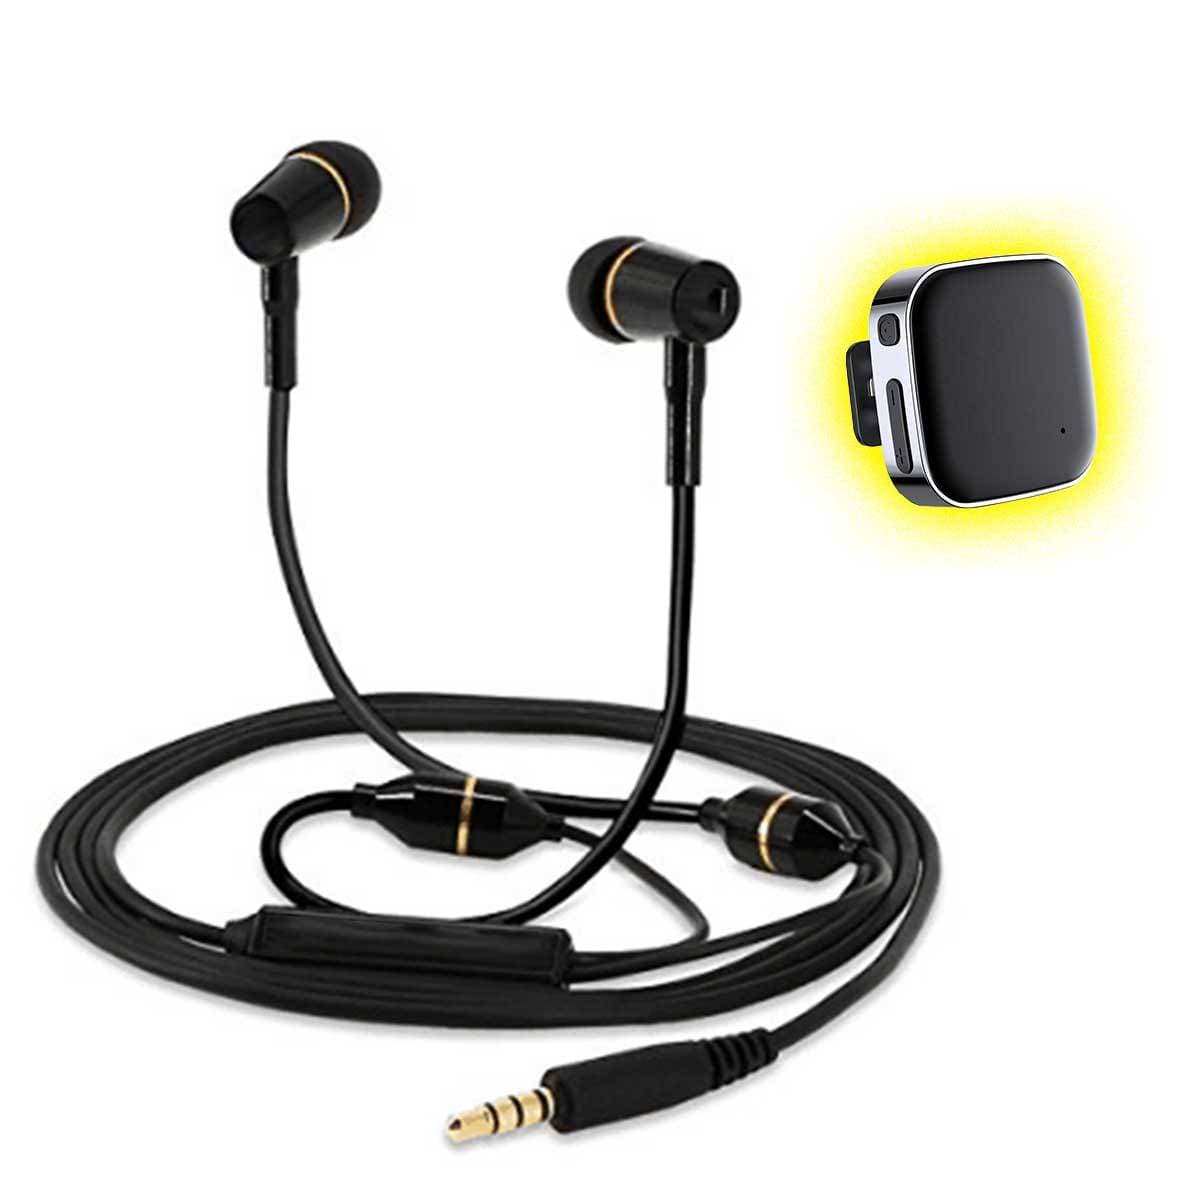 EMF Blocking, Radiation Protection Headphones/Ear Buds - Air Tube Technology Conners Clinic Equipment Black Headphones + Bluetooth Adapter - Conners Clinic